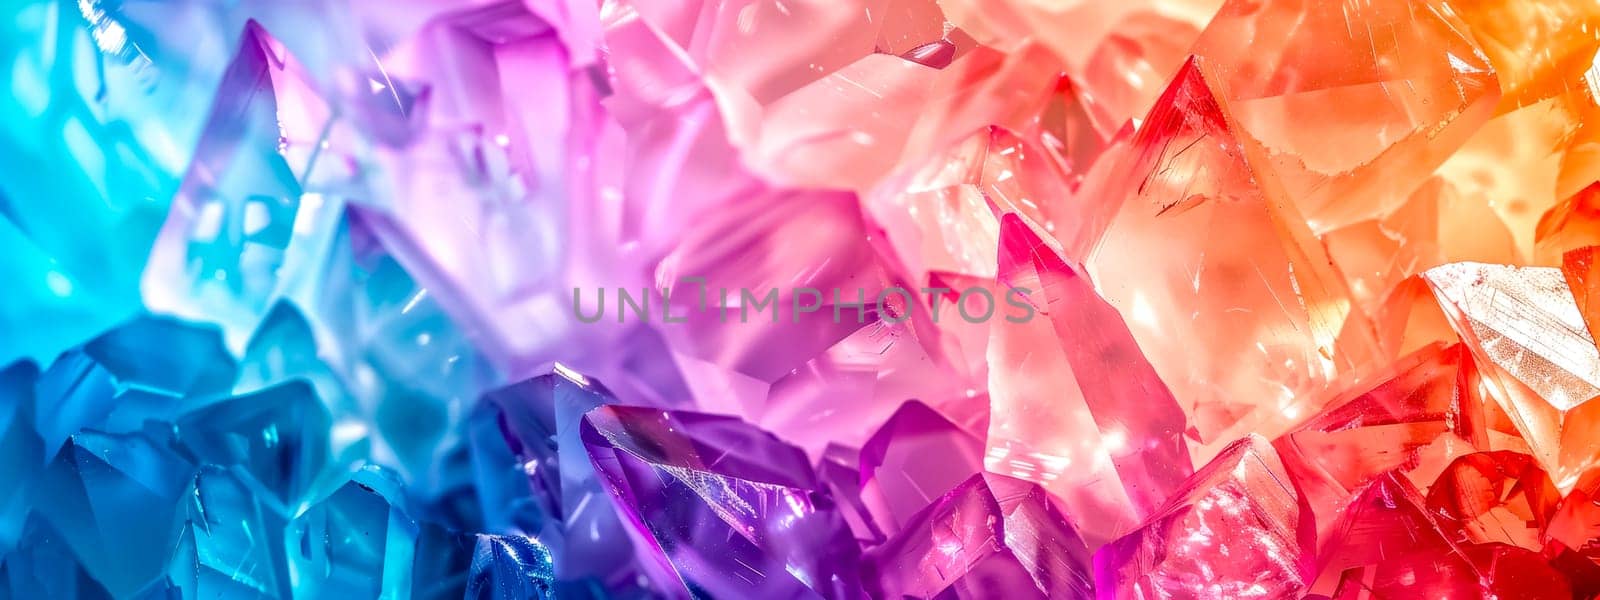 Abstract image of colorful crystal formations with gradient hues by Edophoto